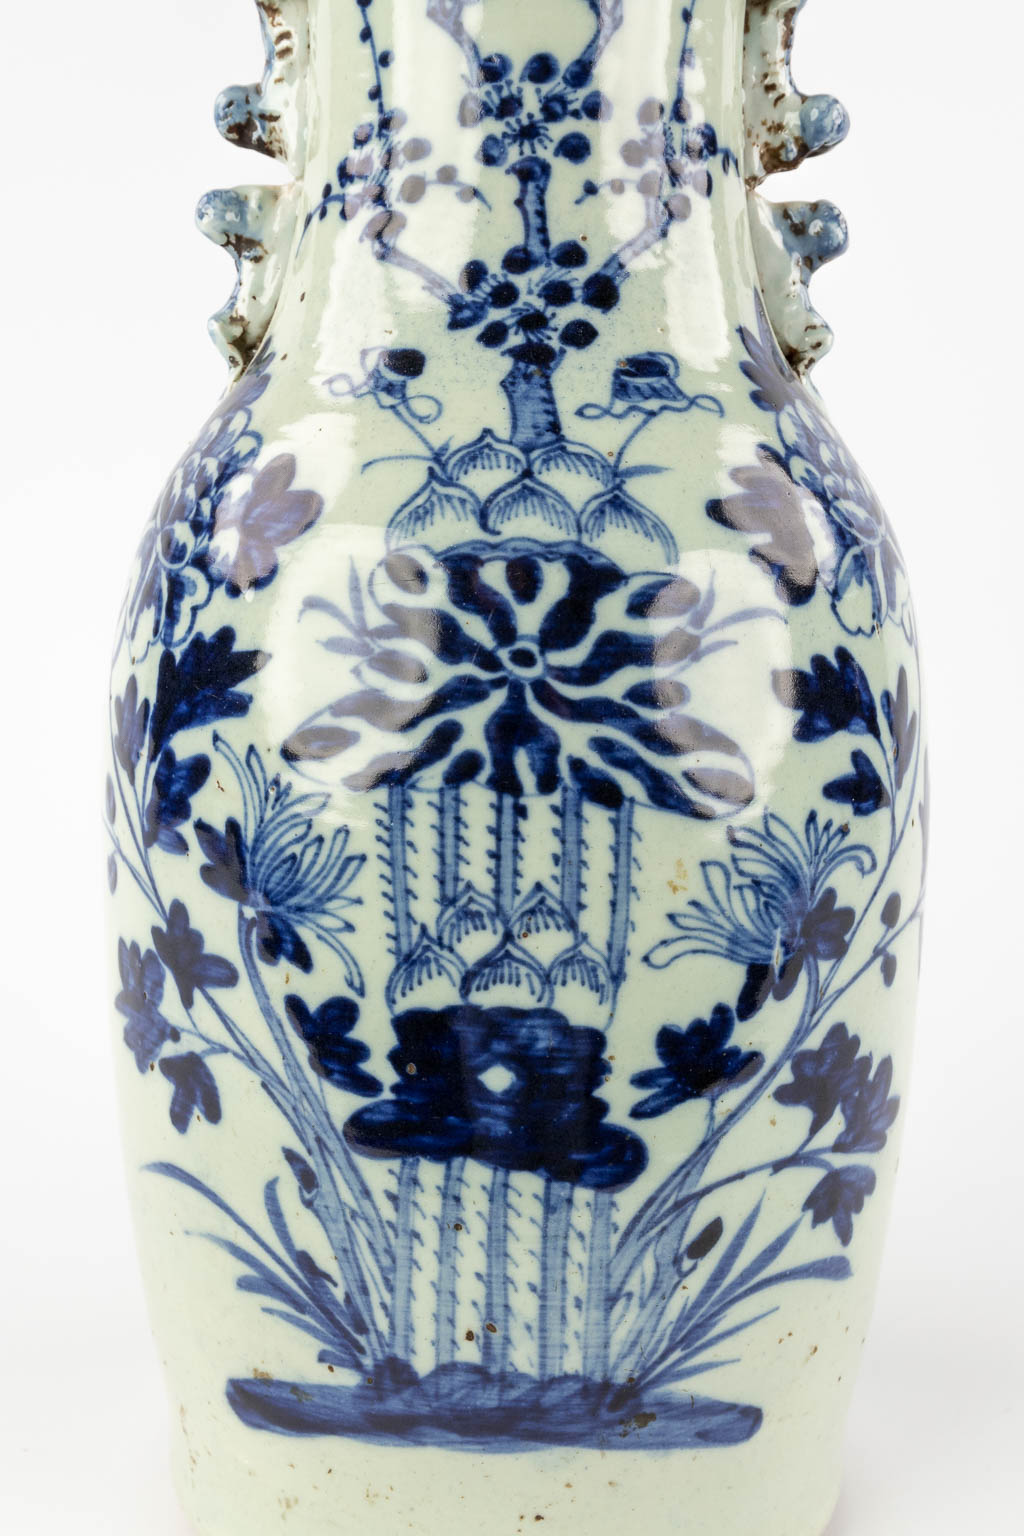 Three Chinese vases with a blue-white decor and Celadon. 19th/20th C. (H:43 x D:19 cm) - Image 18 of 18